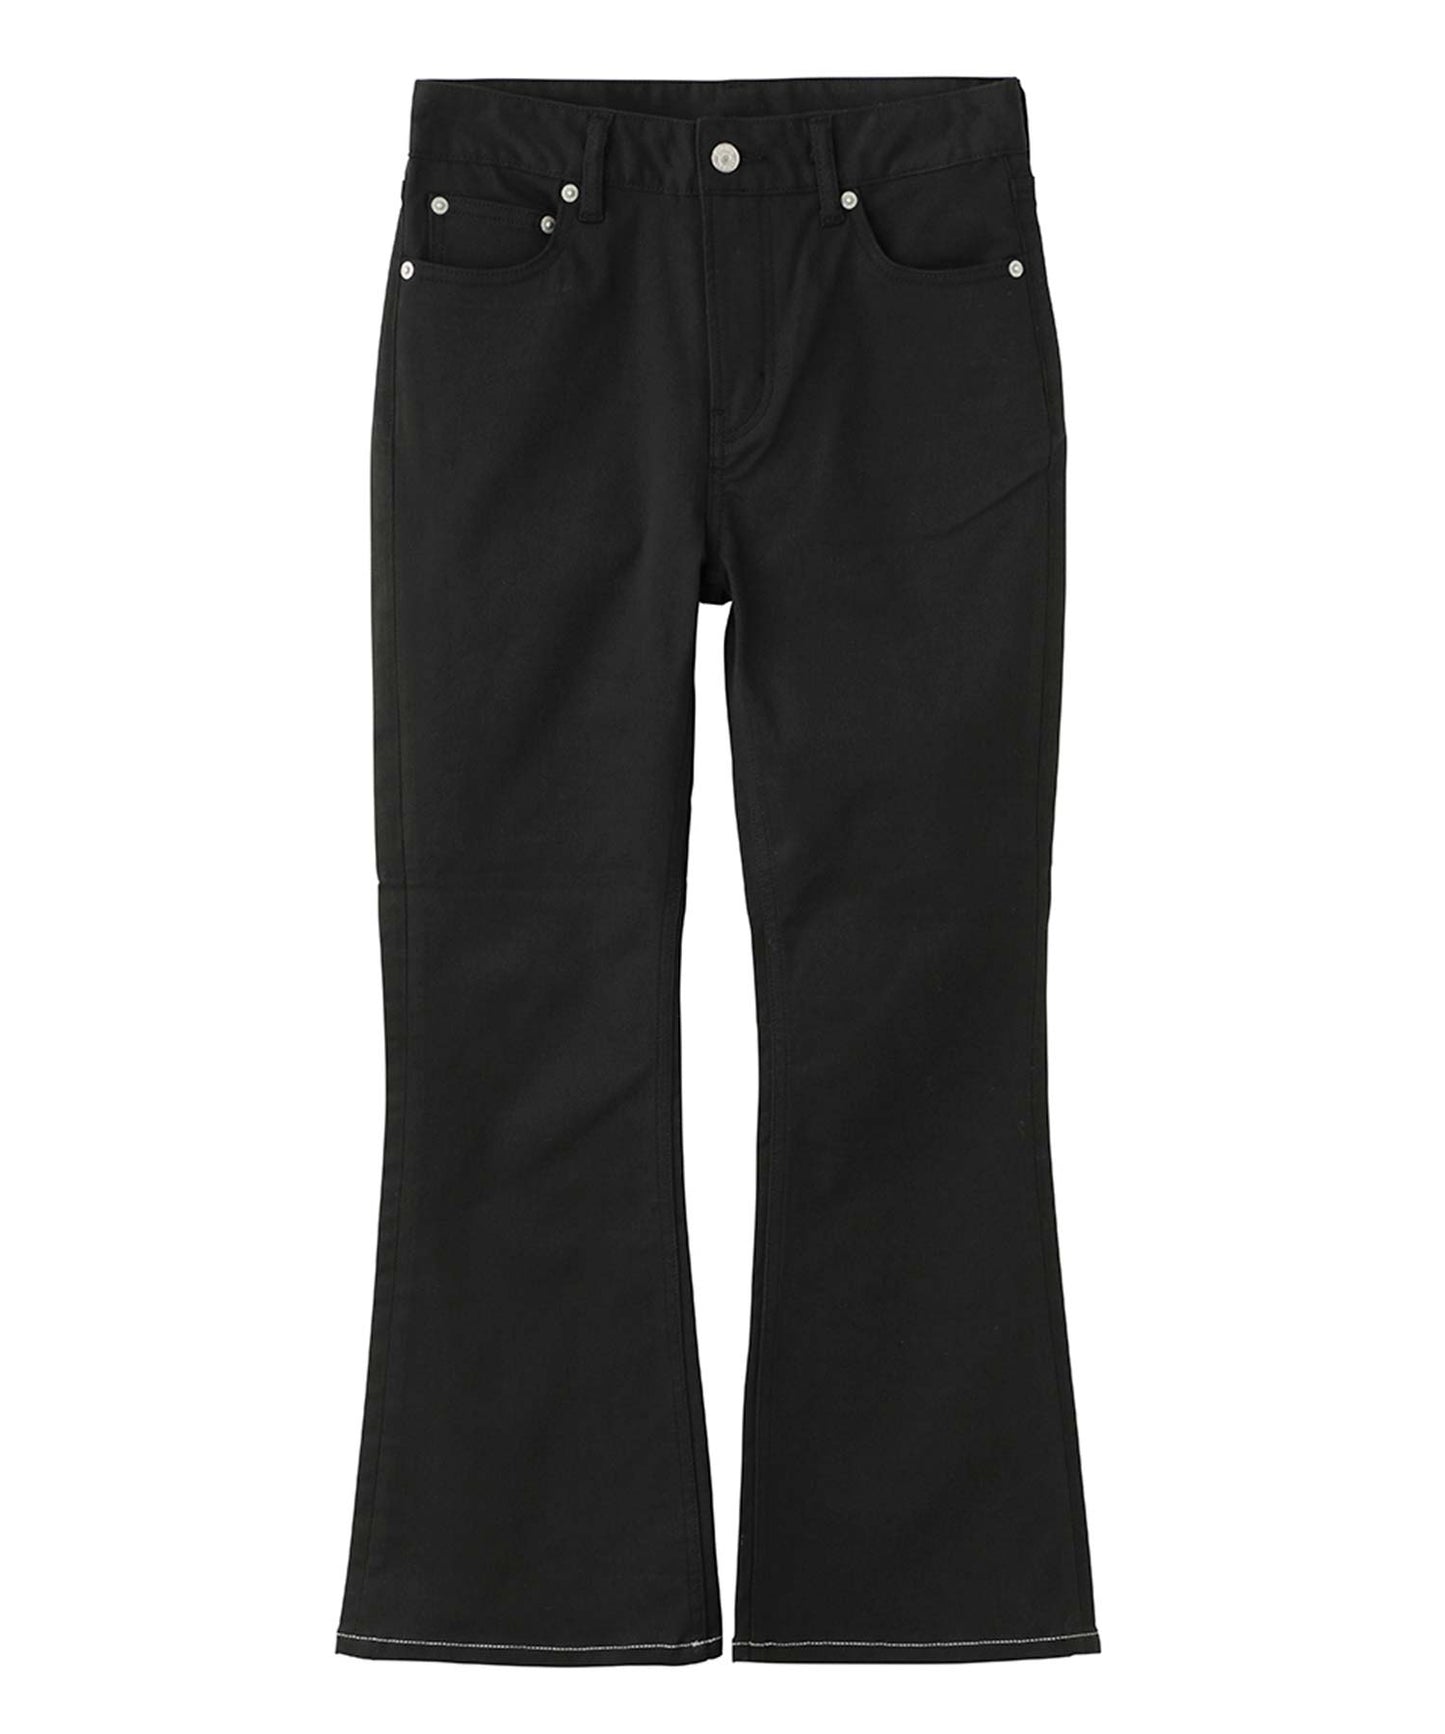 #1 UP FLARE PANTS